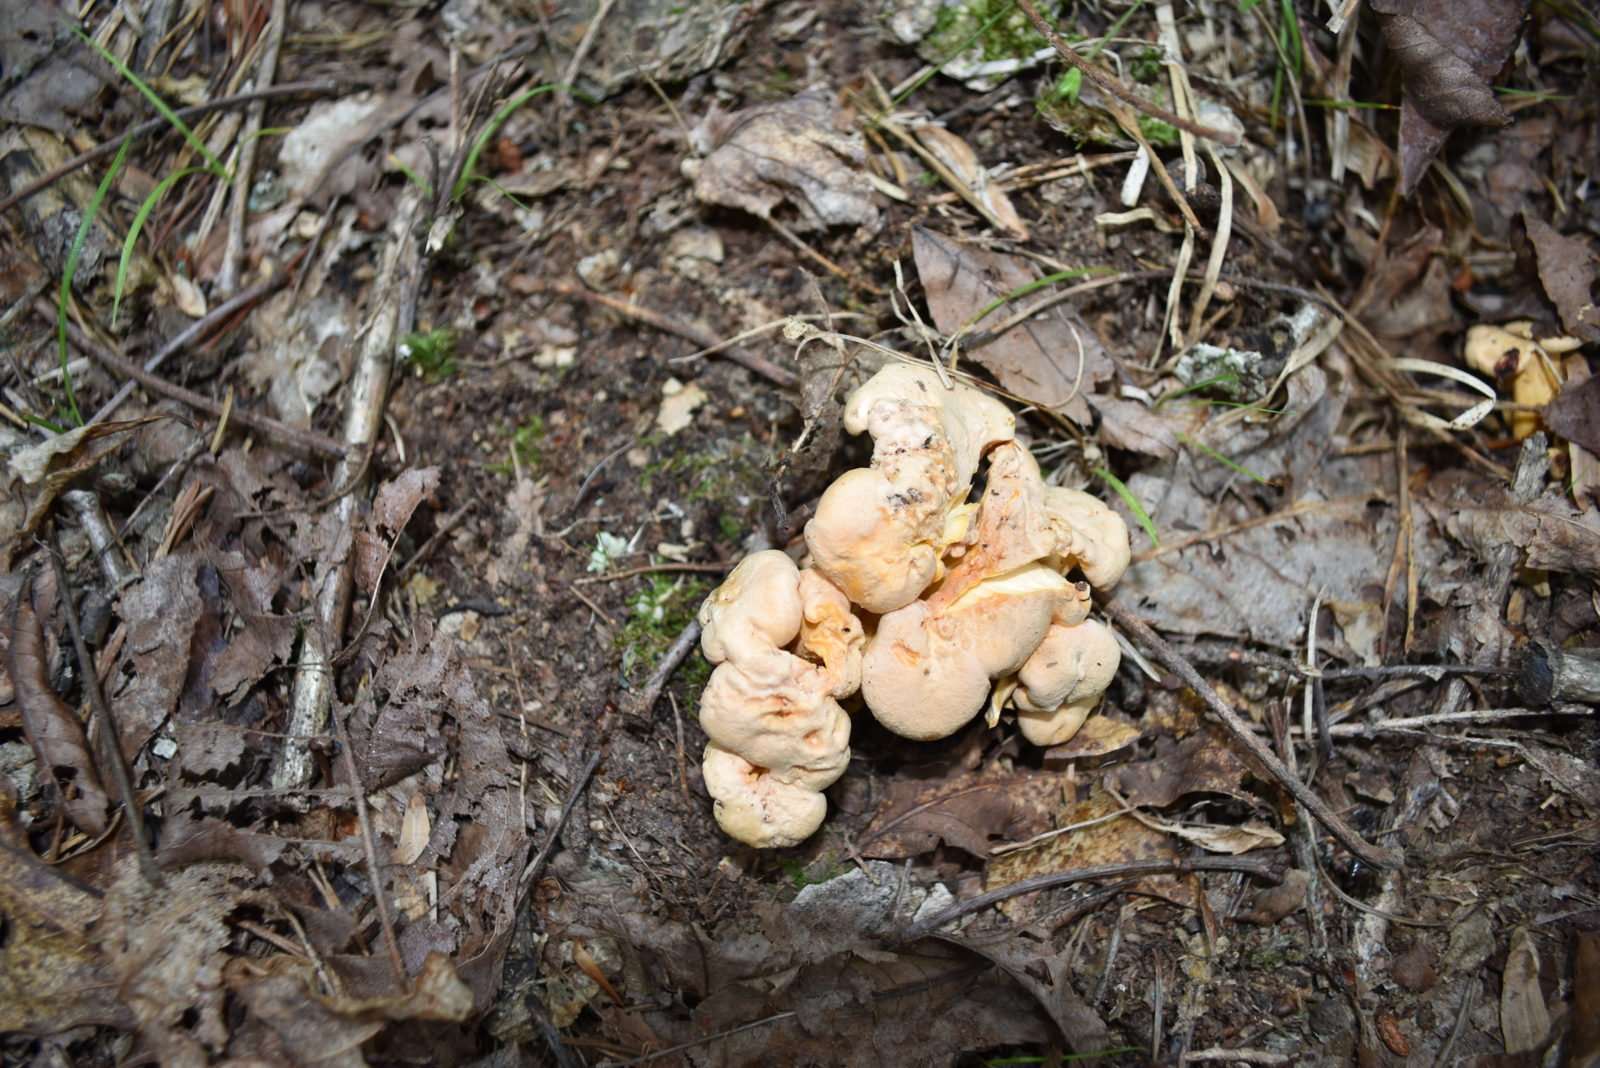 An image of smooth chanterelles on the forest floor; they are a beige-orange in color and have rounded messily organized tops